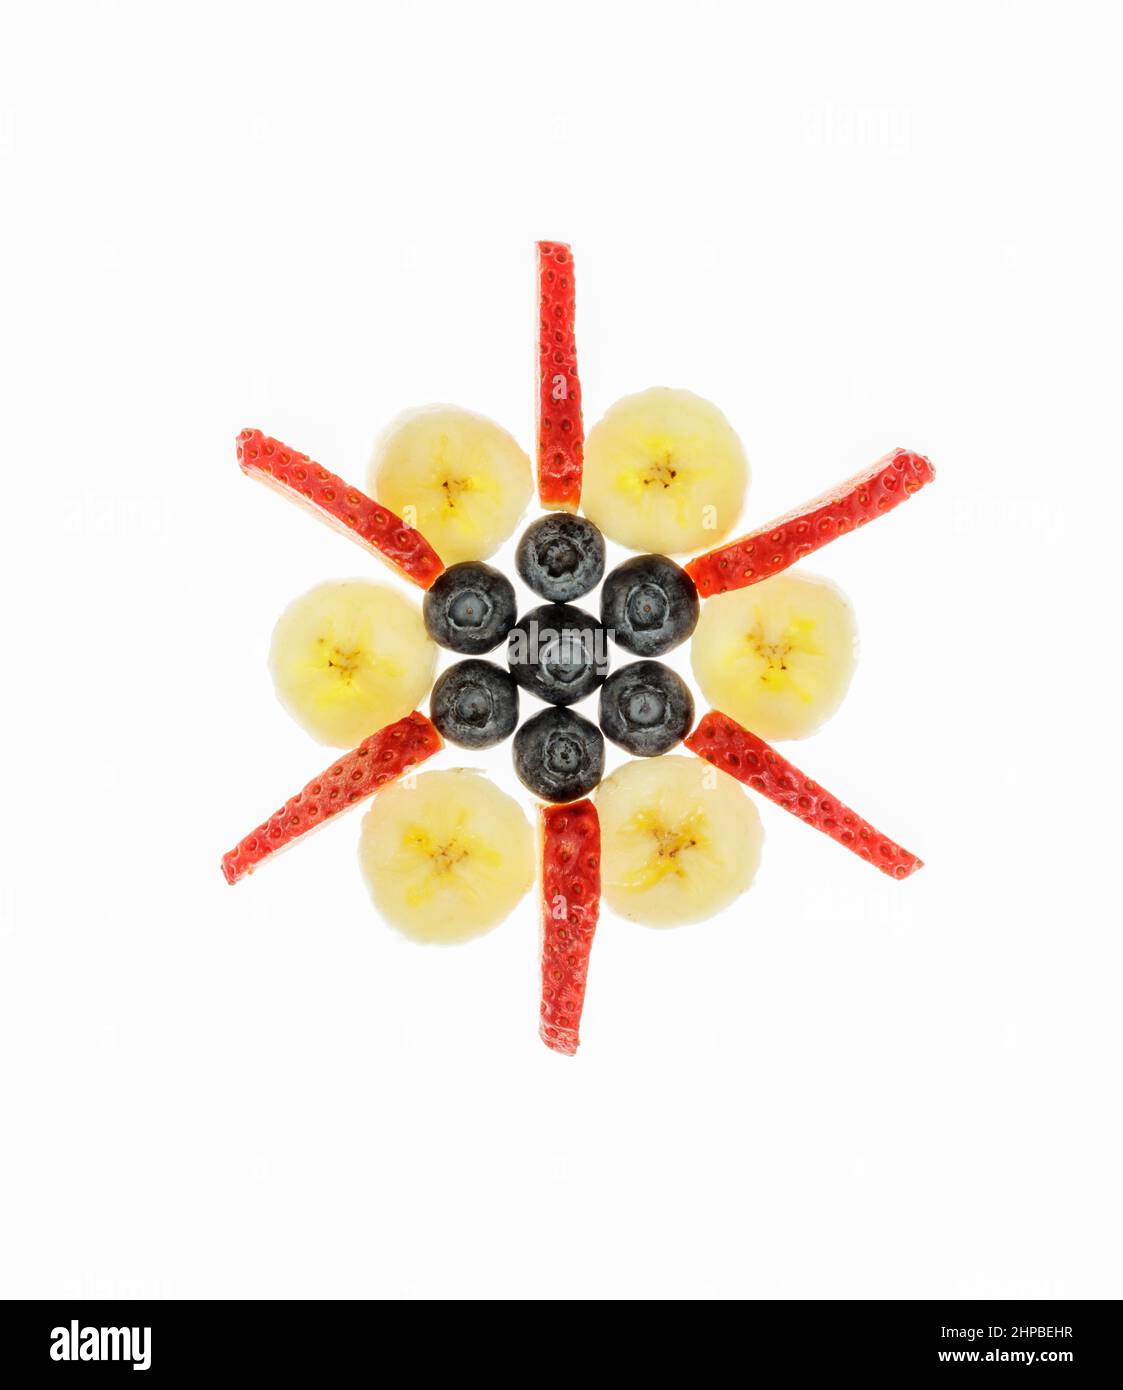 Fresh strawberries ,blueberries and banana arranged in the shape of a star Stock Photo